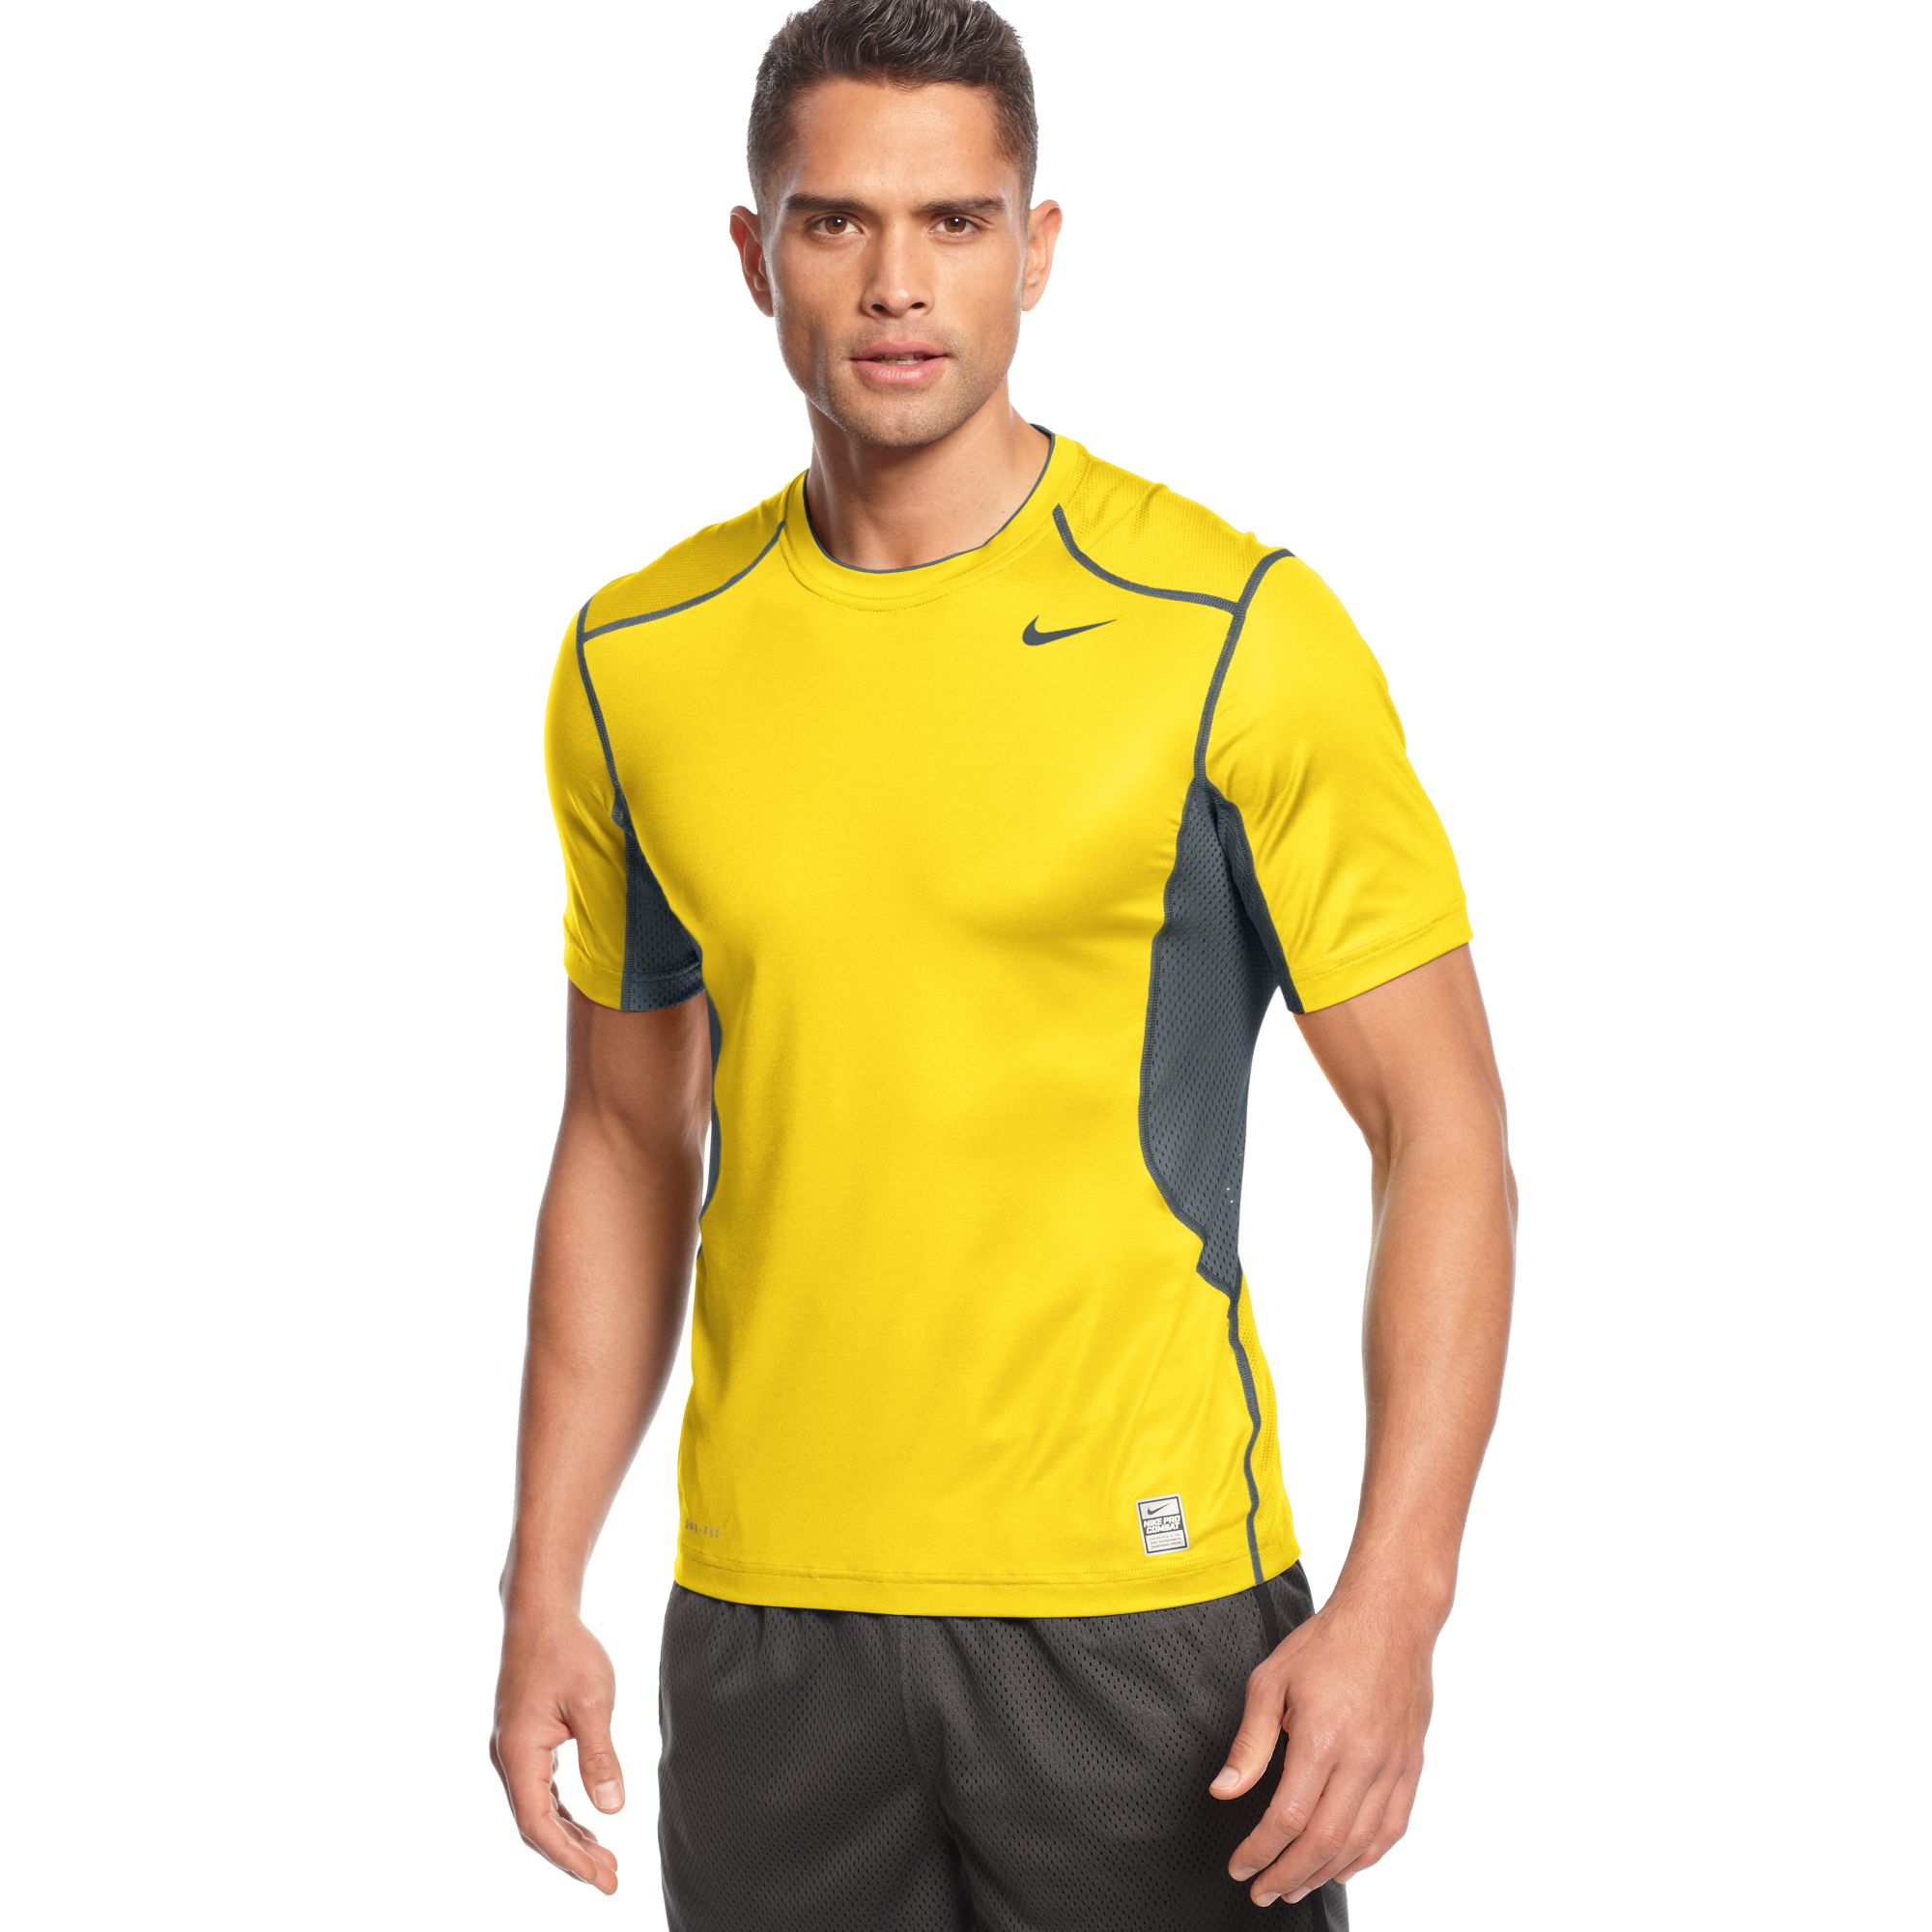 Lyst - Nike Hypercool 12 Fitted Tshirt in Yellow for Men